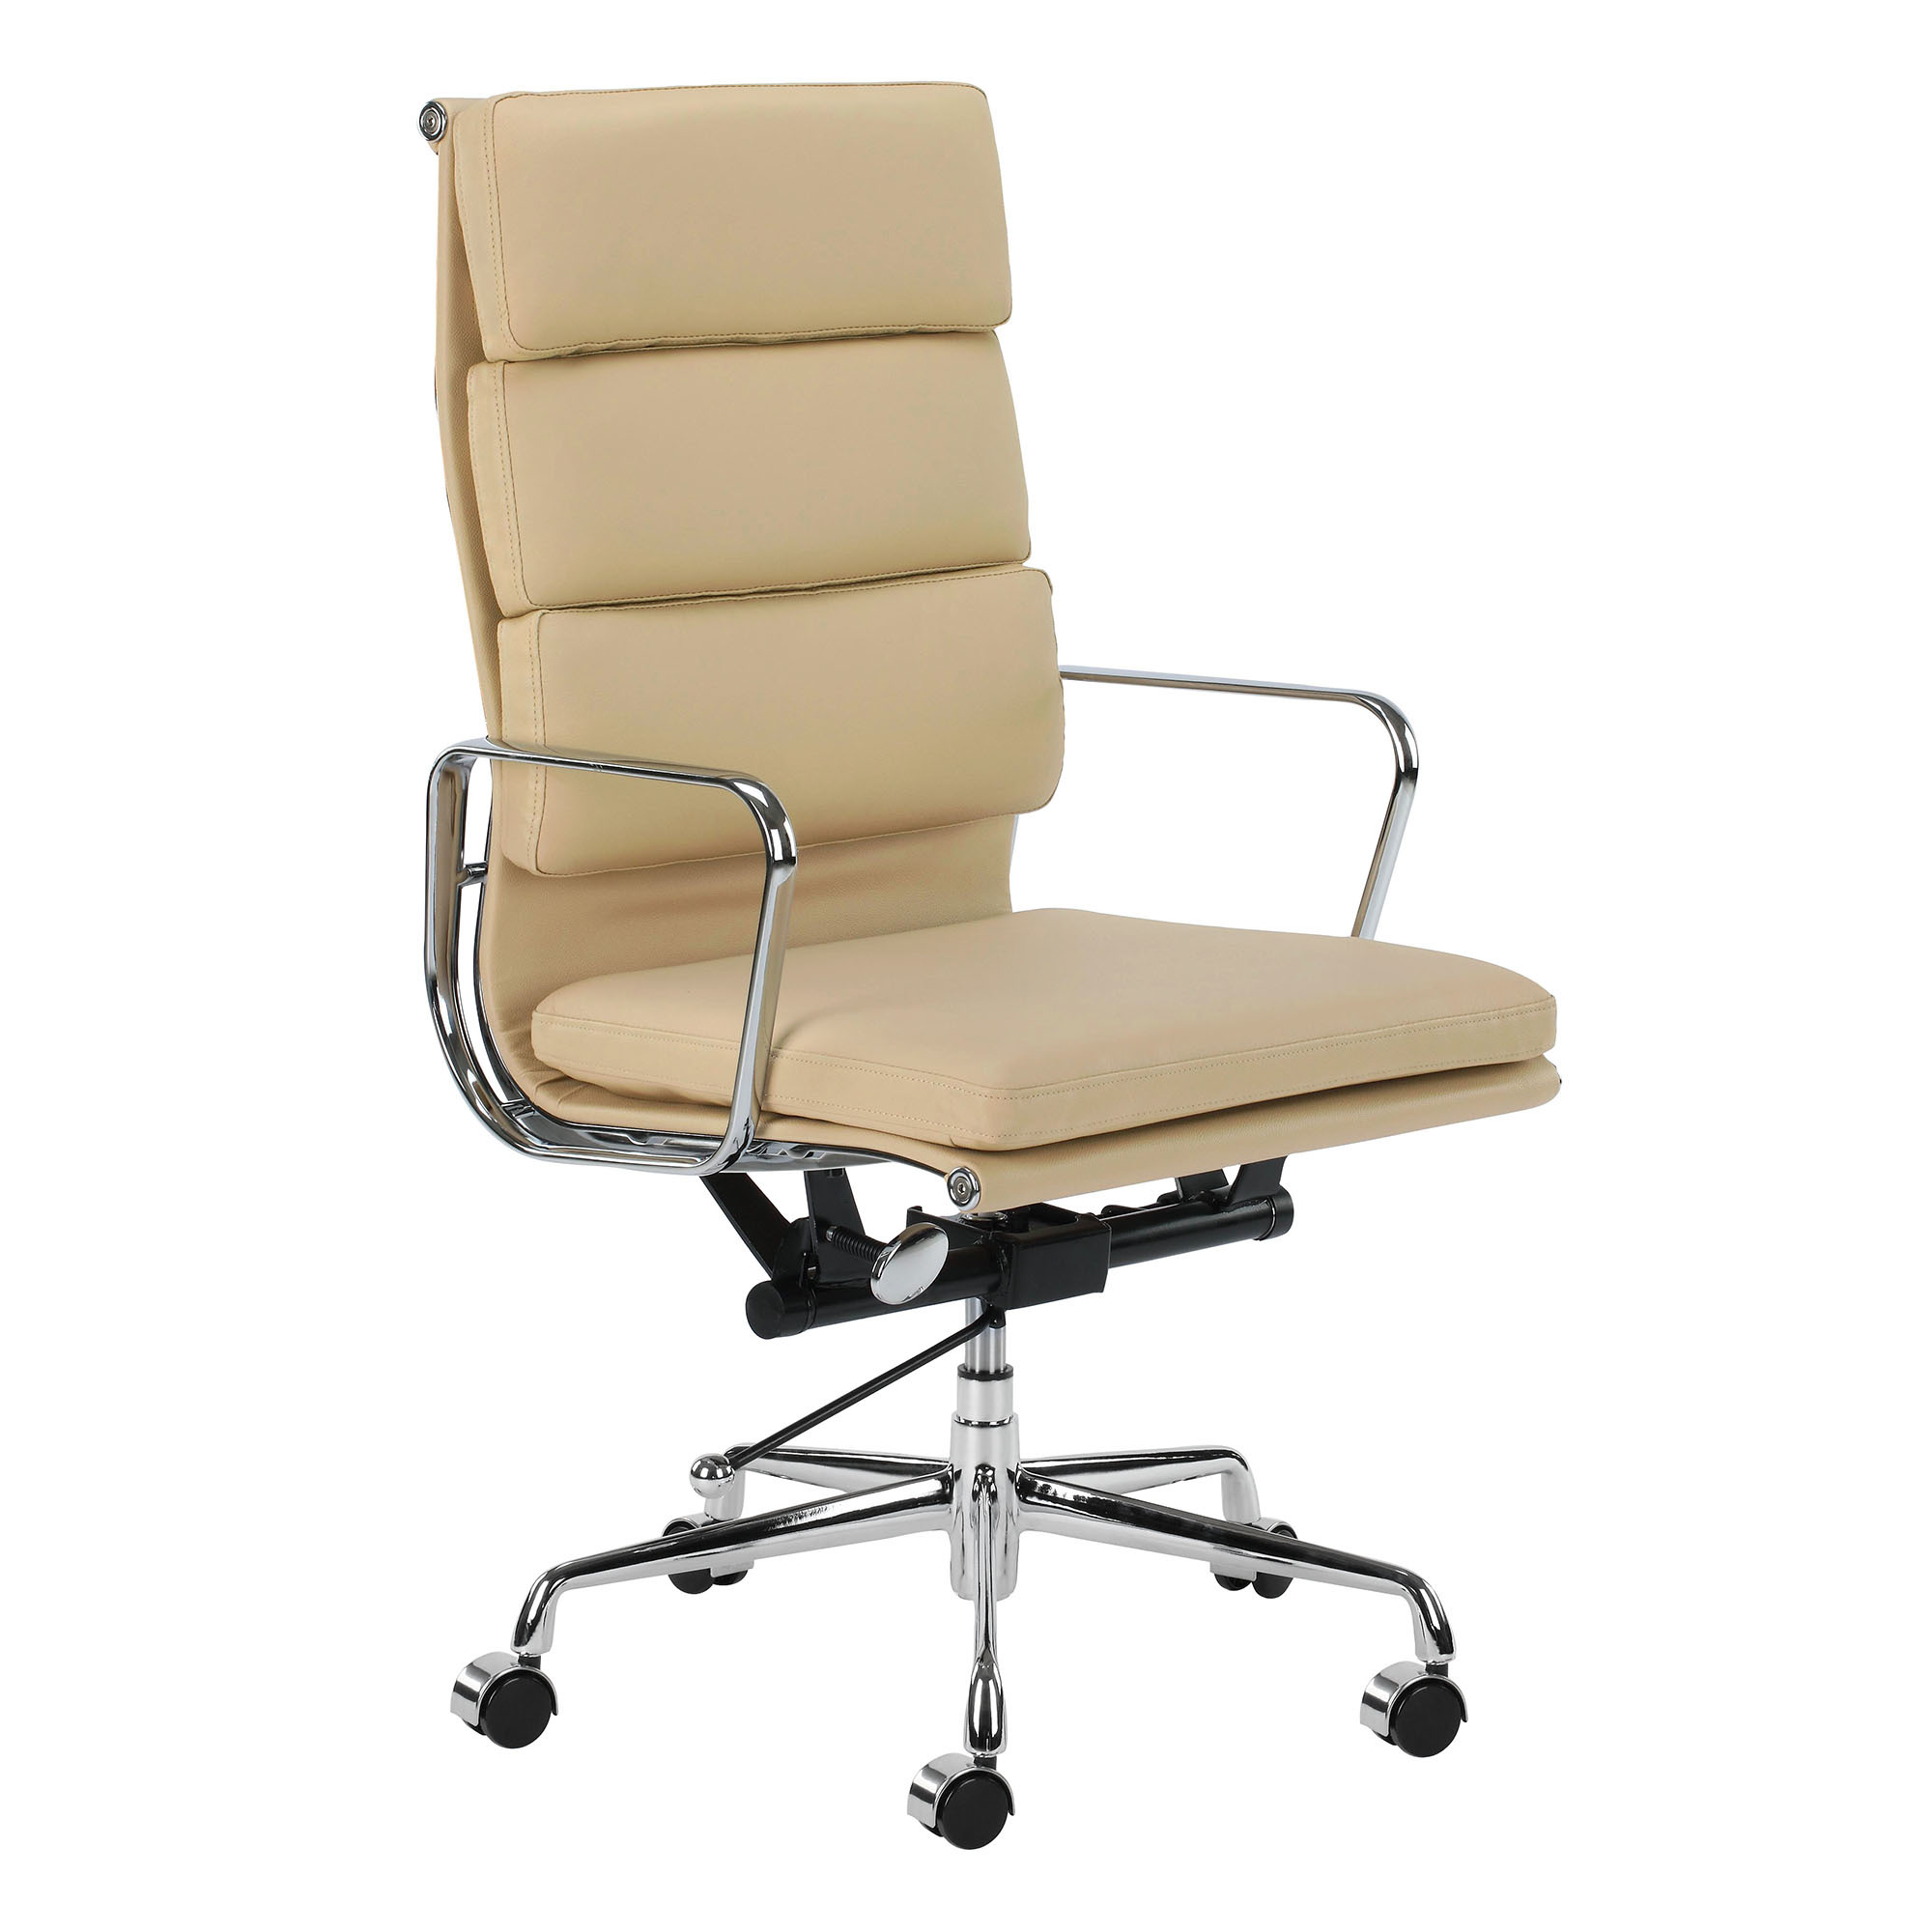 NEW Eames Premium Leather Replica High Back Soft Pad Management Office ...